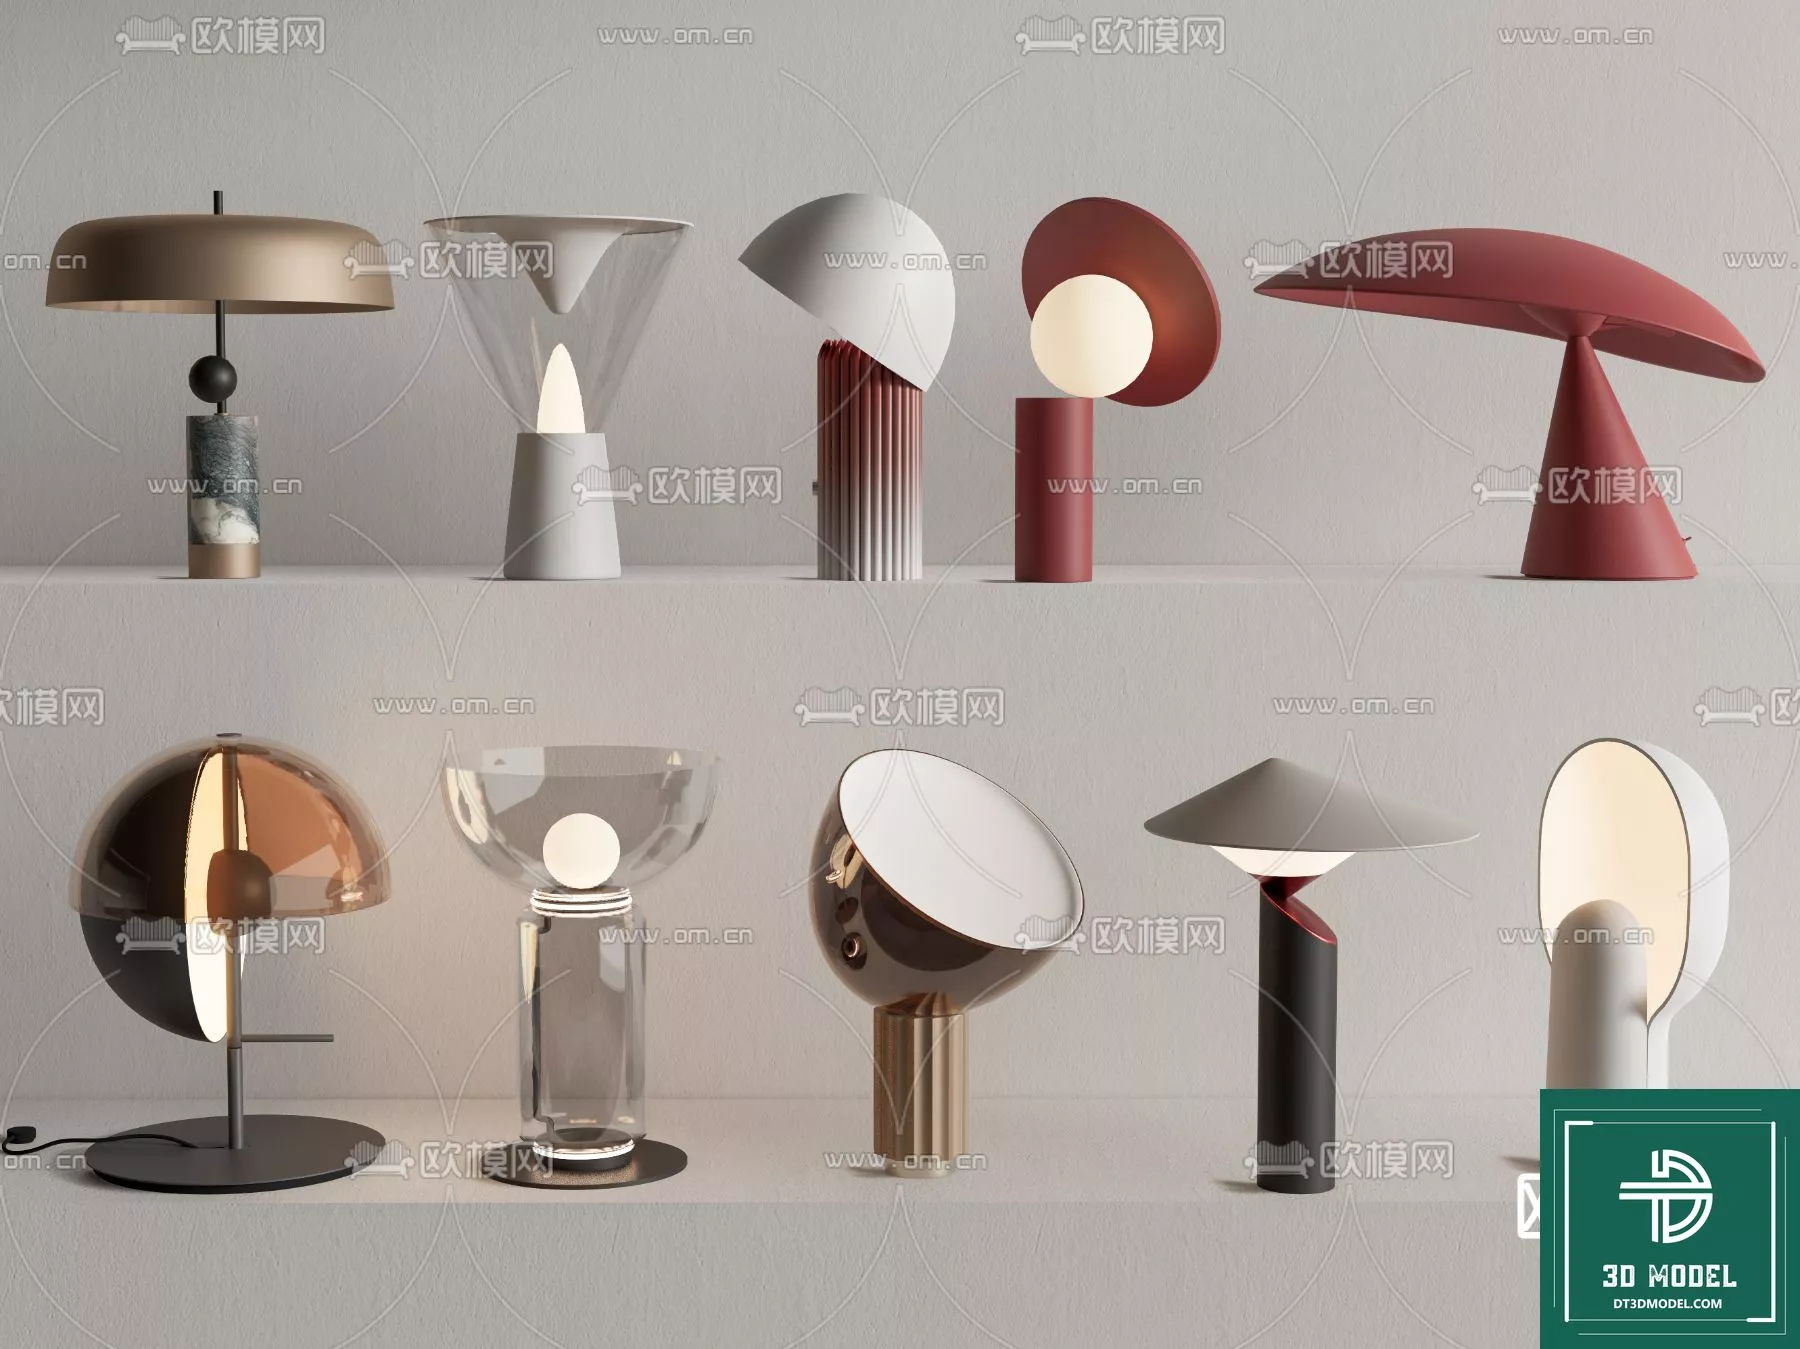 MODERN TABLE LAMP - SKETCHUP 3D MODEL - VRAY OR ENSCAPE - ID14545